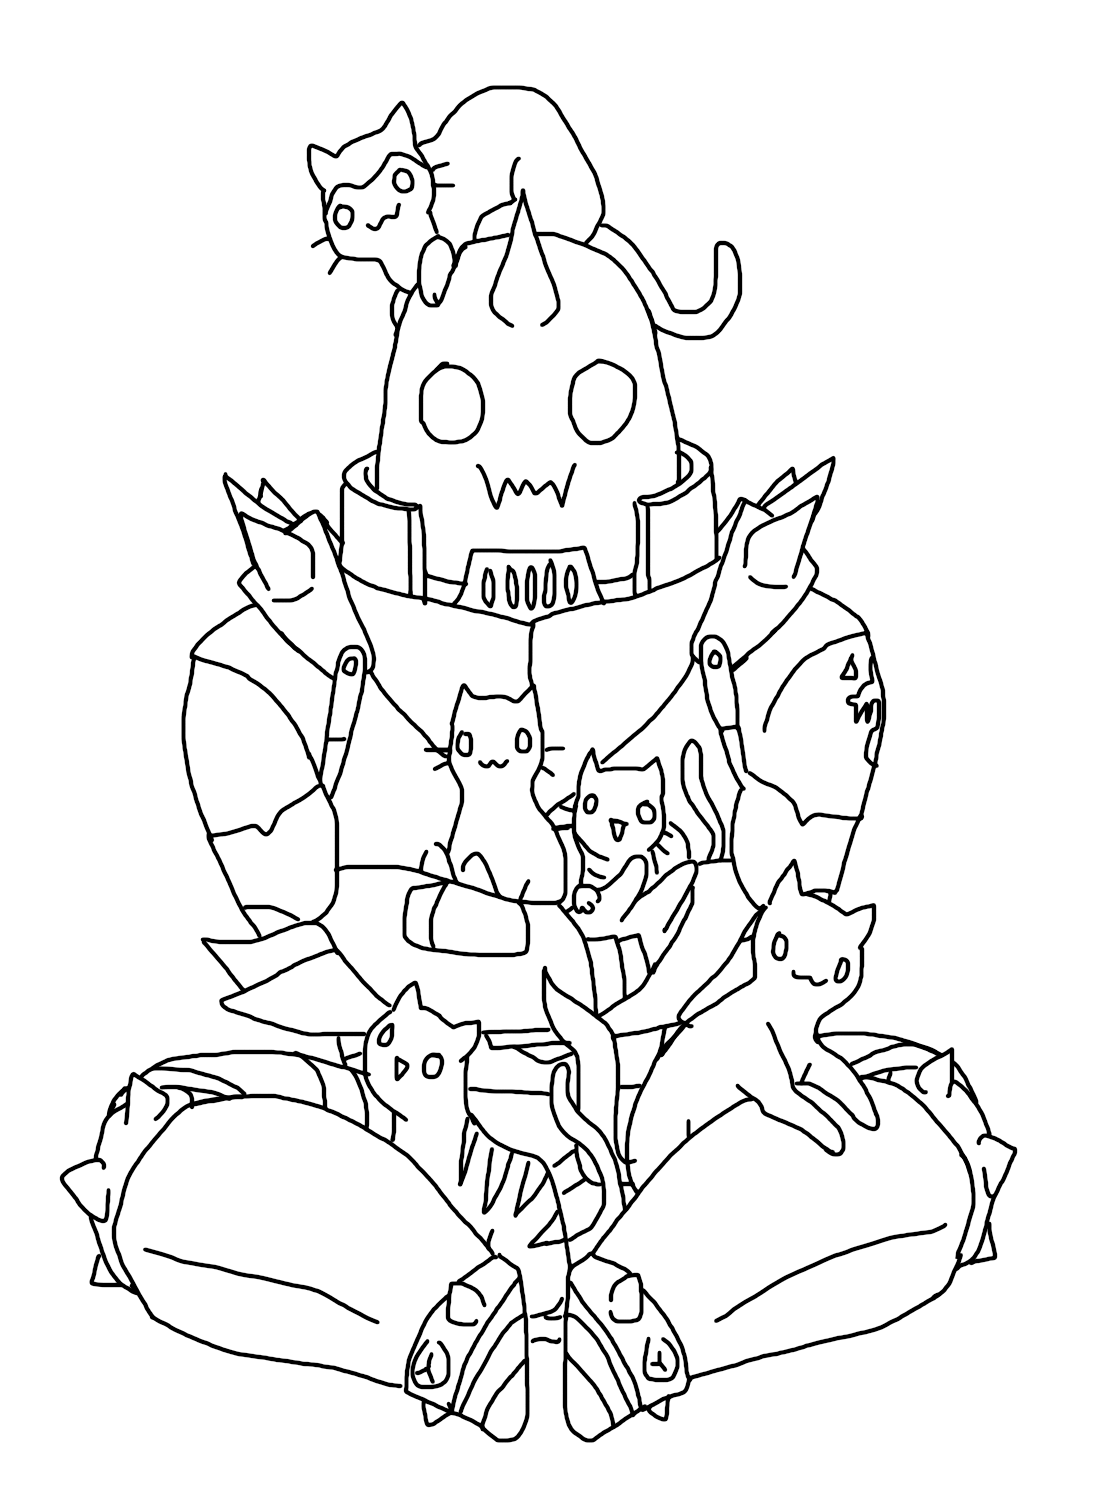 Coloring Sheet Alphonse Elric from Alphonse Elric